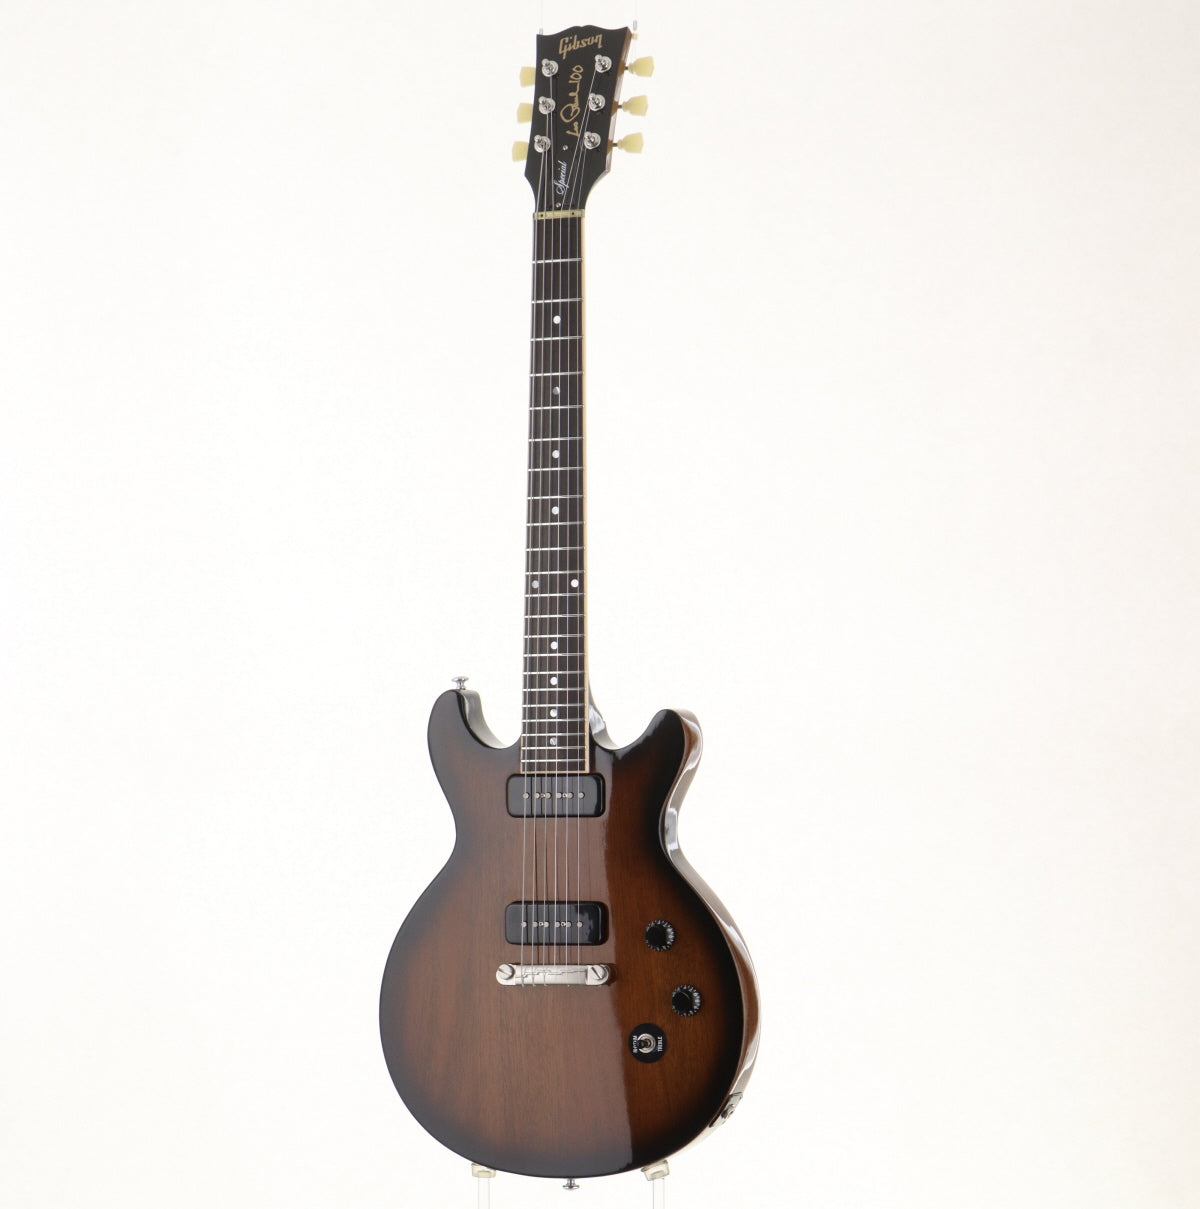 [SN 150025004] USED Gibson / Les Paul Special Double Cutaway 2015 Modified Vintage Sunburst [09]